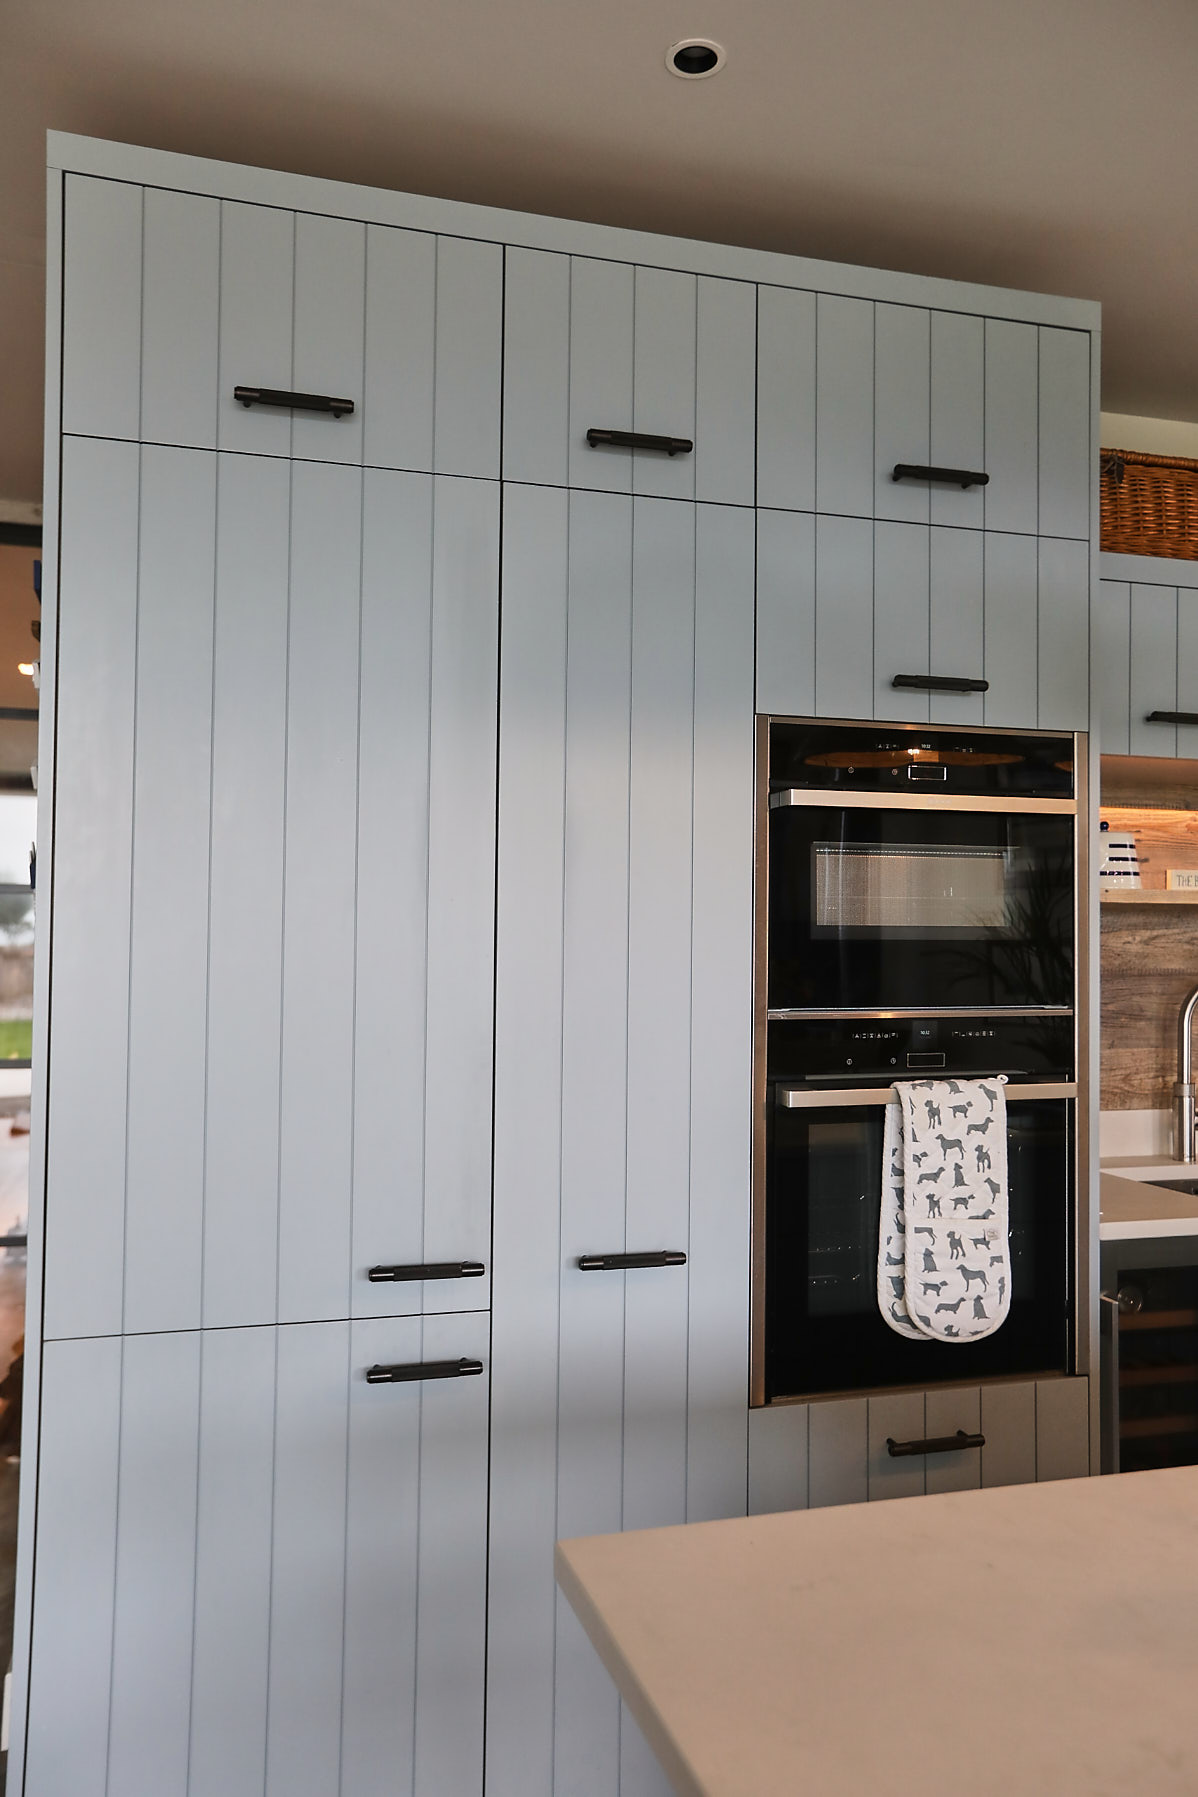 Tall integrated eye level Siemens oven in blue kitchen cabinet